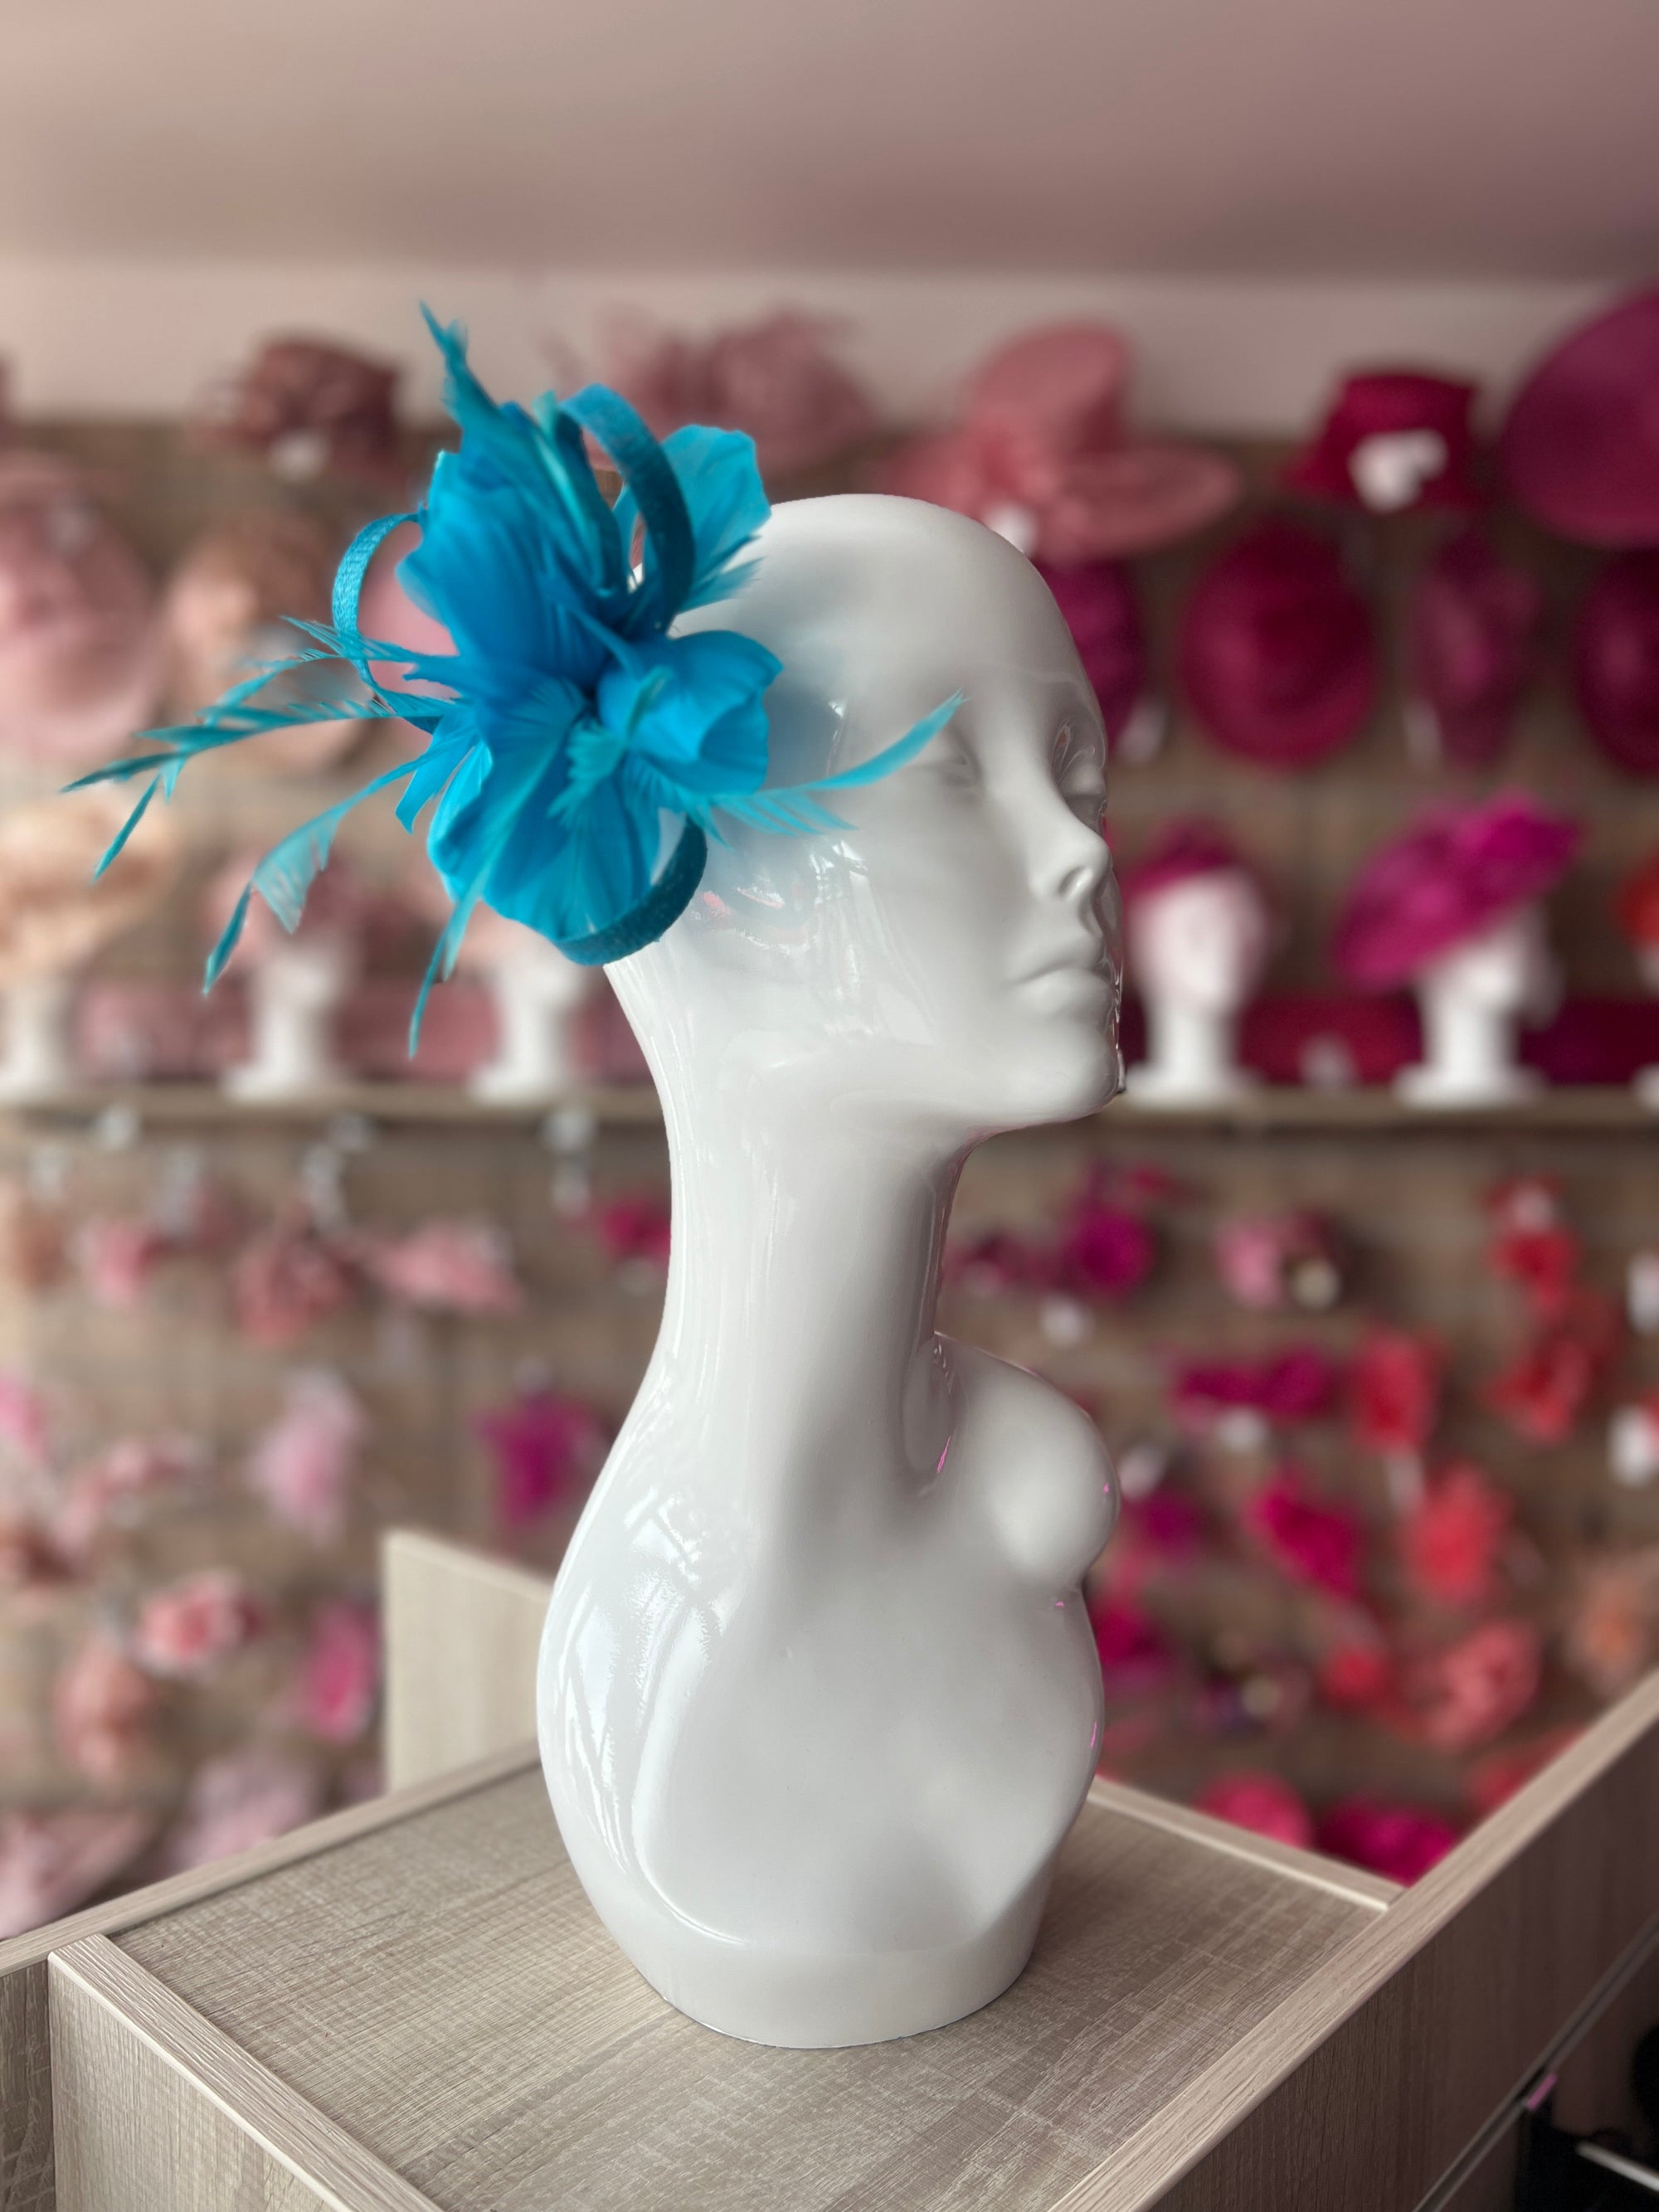 Clip On Turquoise Fascinator with Loops & Feather Flower-Fascinators Direct